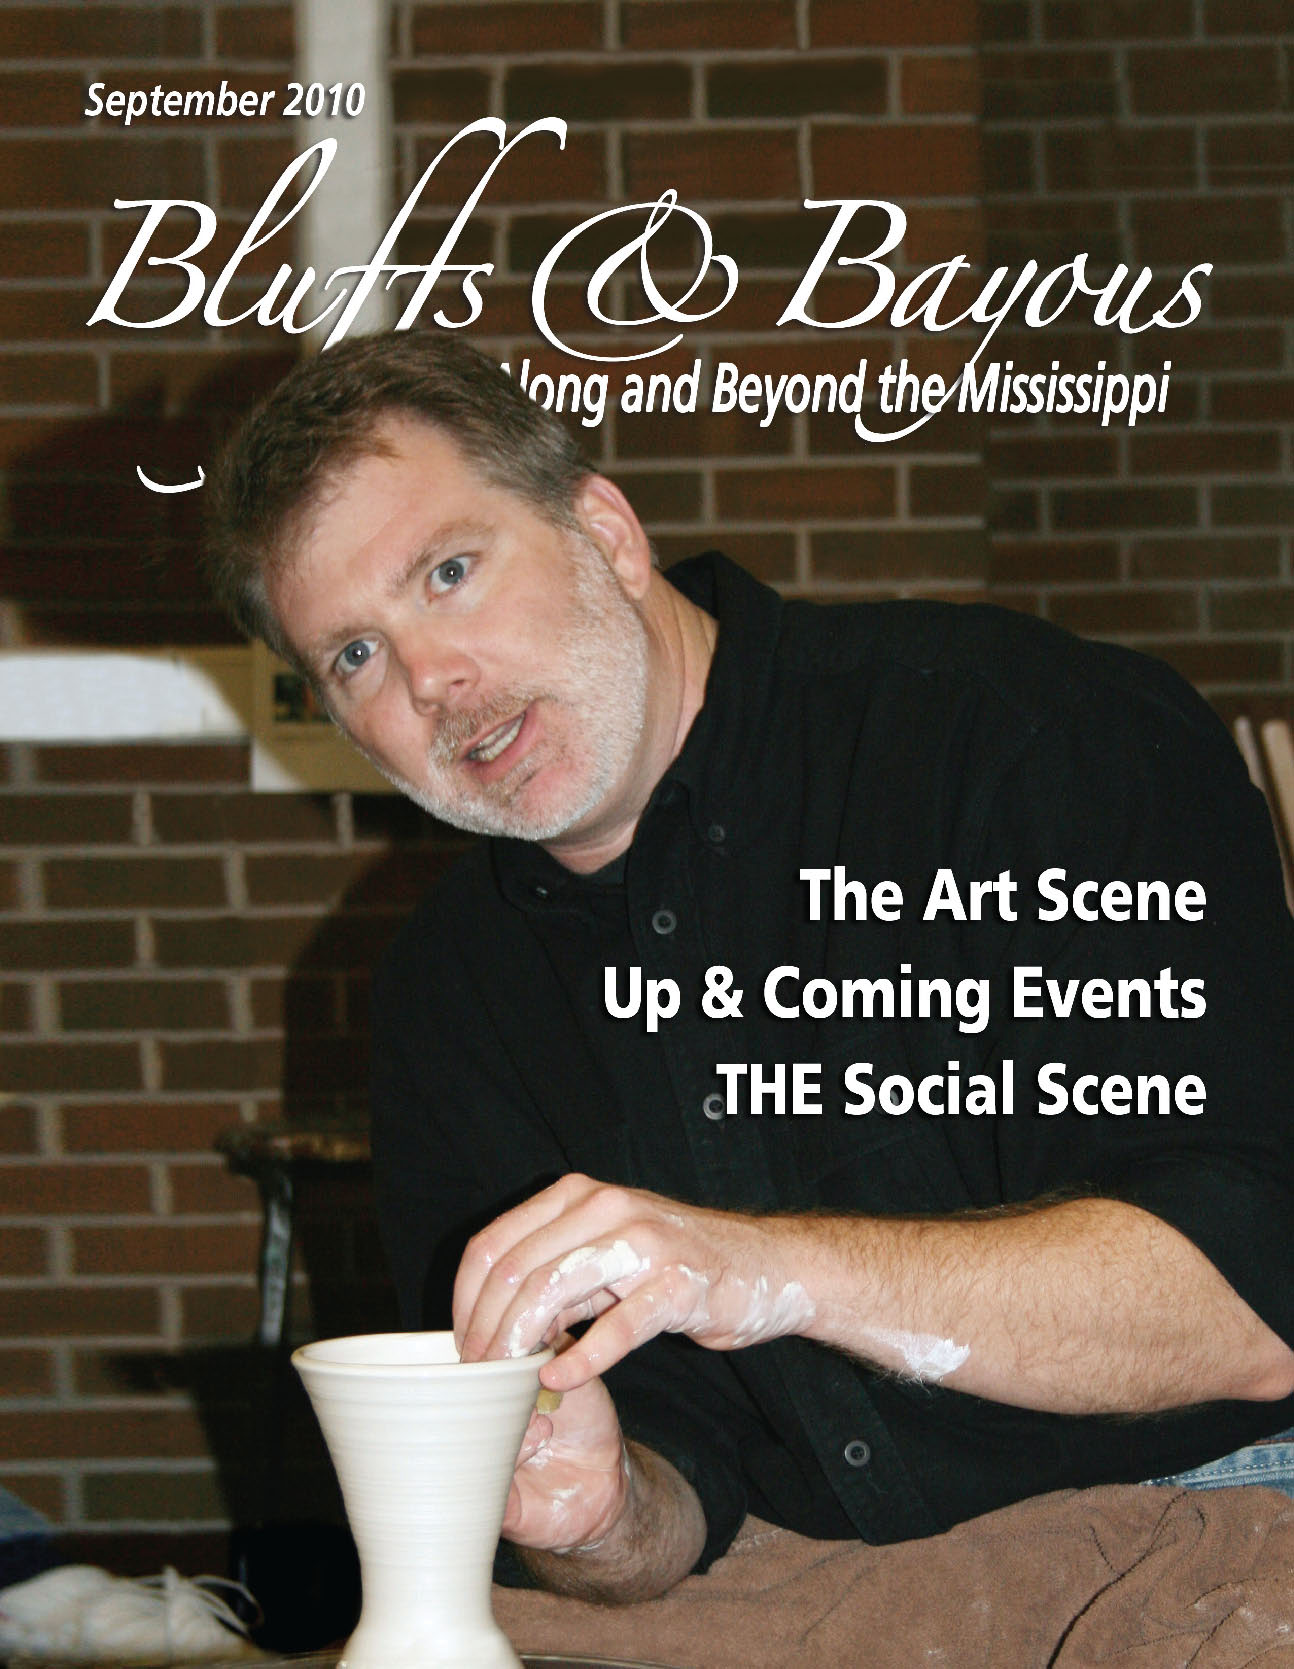 conner burns on cover of bluffs and bayous